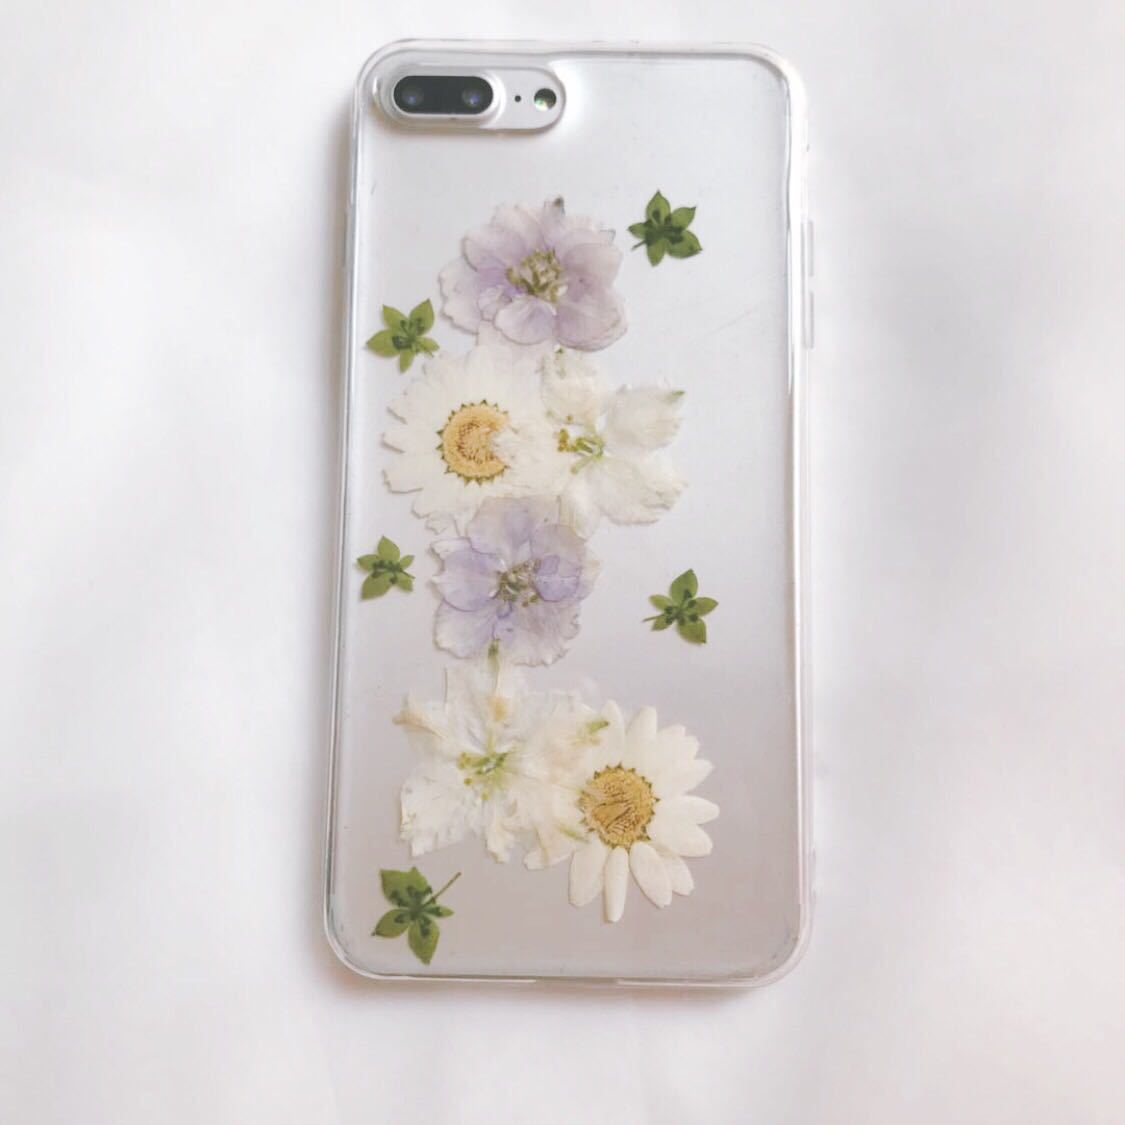 Aesthetic Iphone Cases Aesthetic Iphone Covers